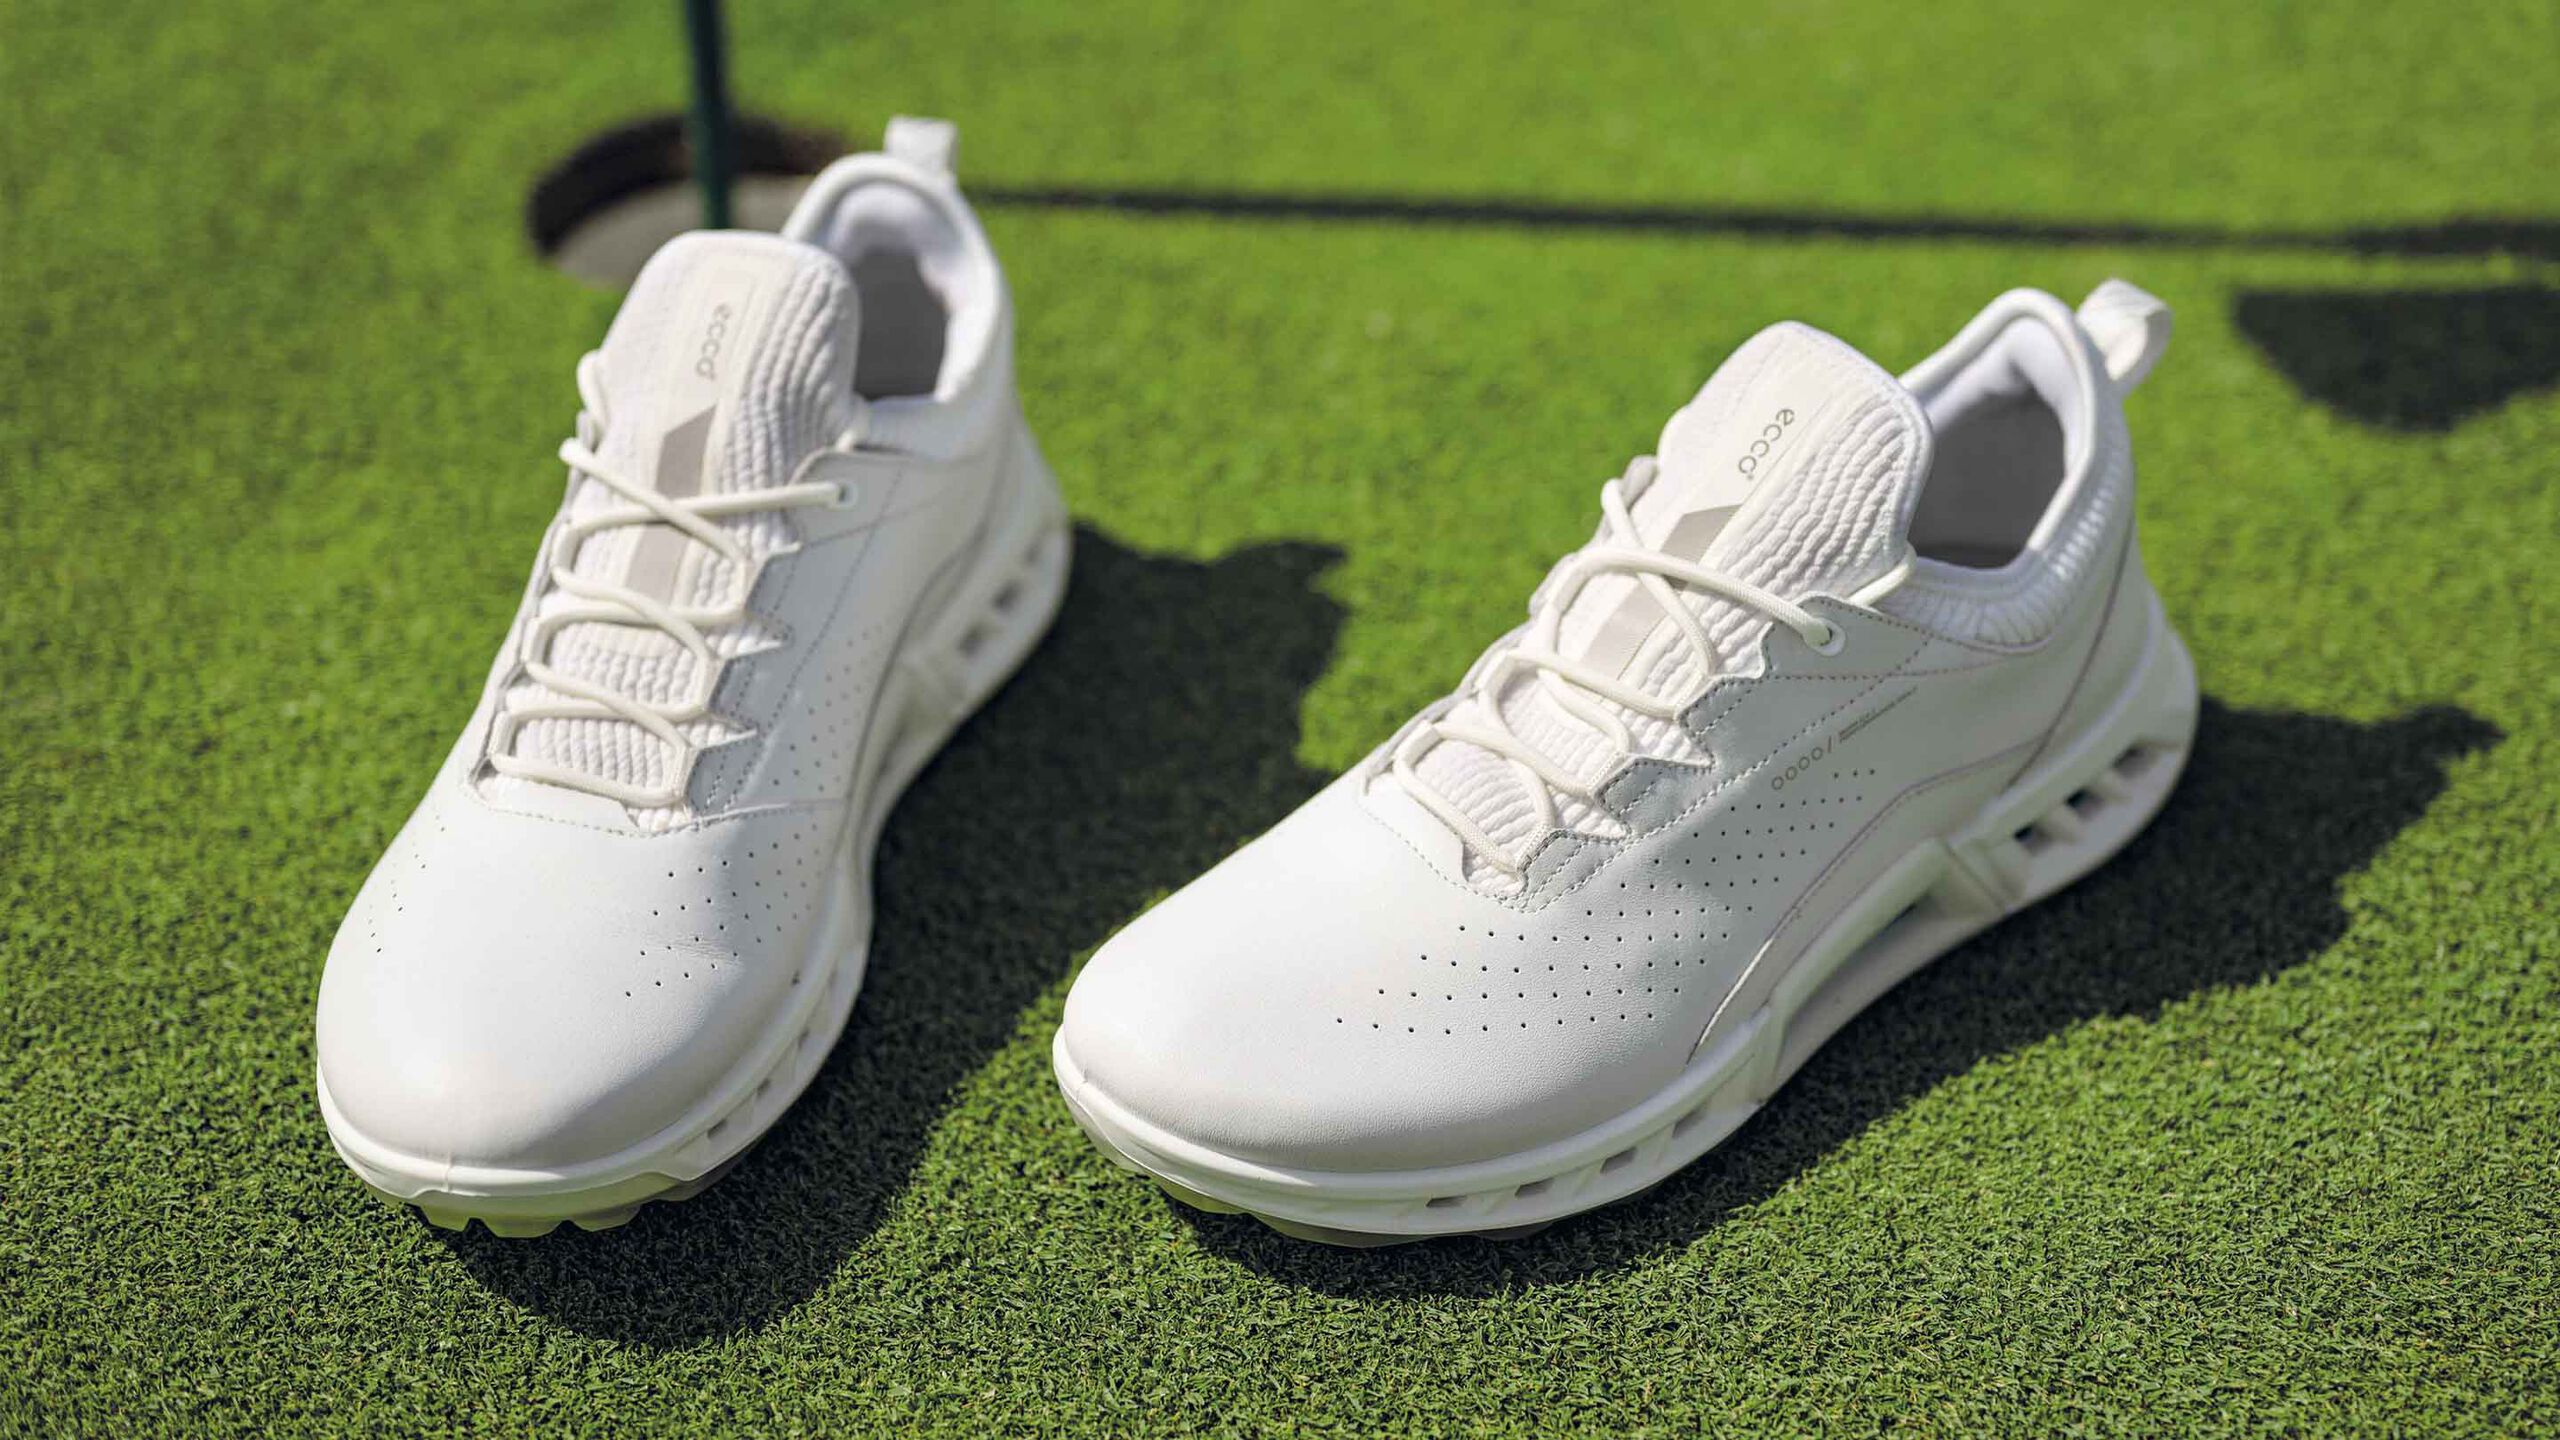 White golf shoes